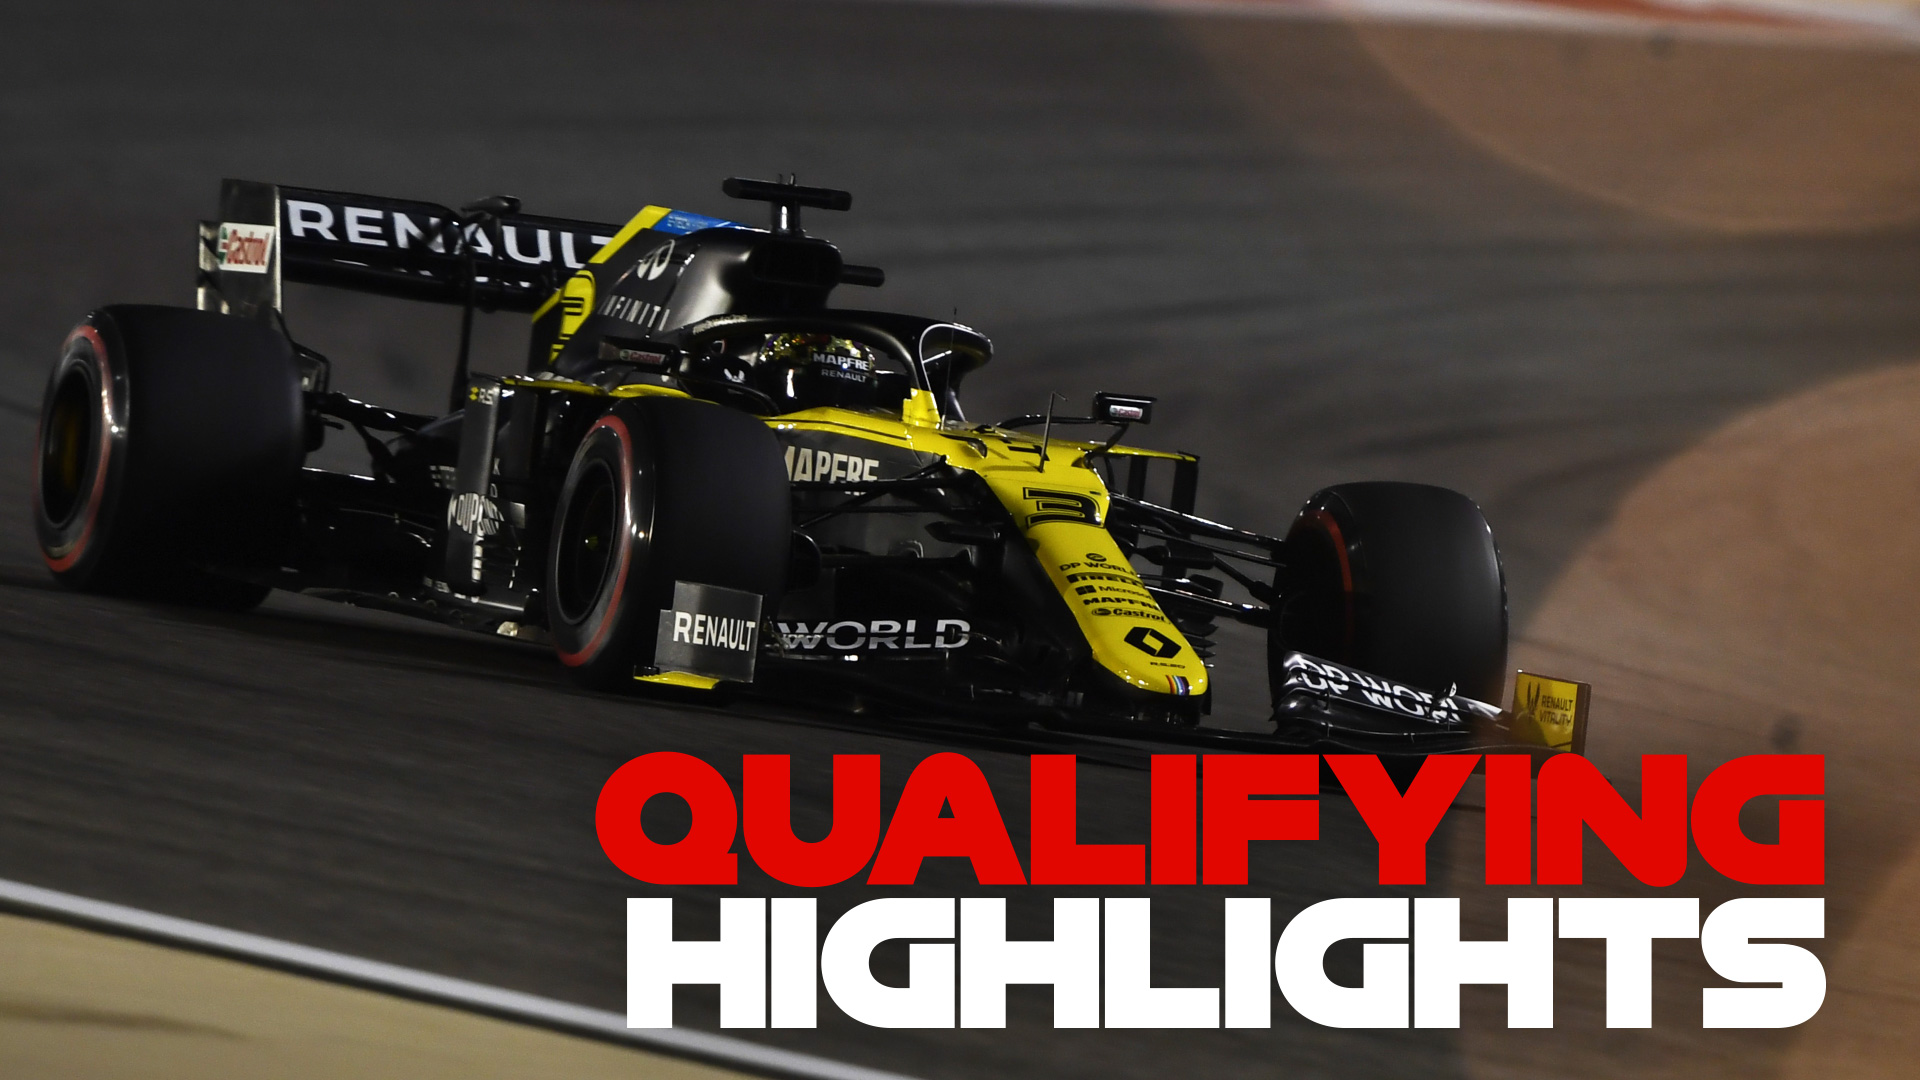 HIGHLIGHTS: Watch all the action qualifying as Lewis Hamilton takes pole for the Bahrain Grand Prix | Formula 1®